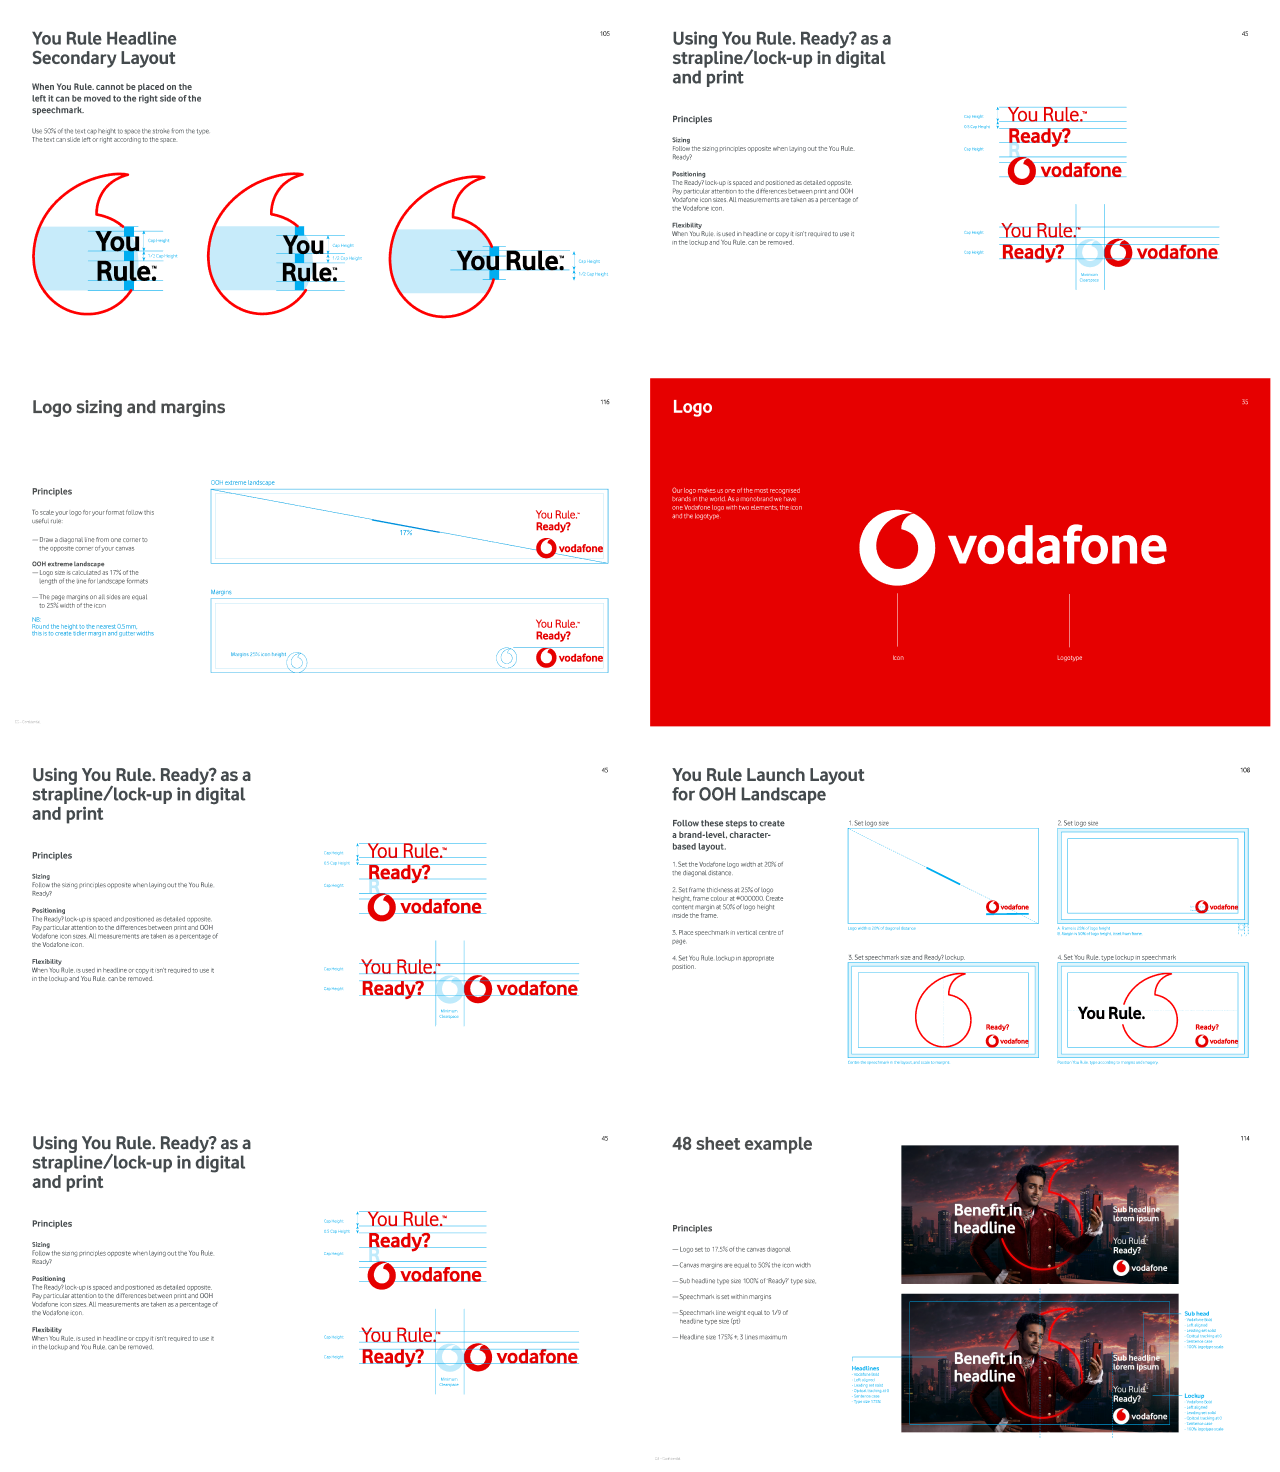 vodafone-playbook-pages-1-1